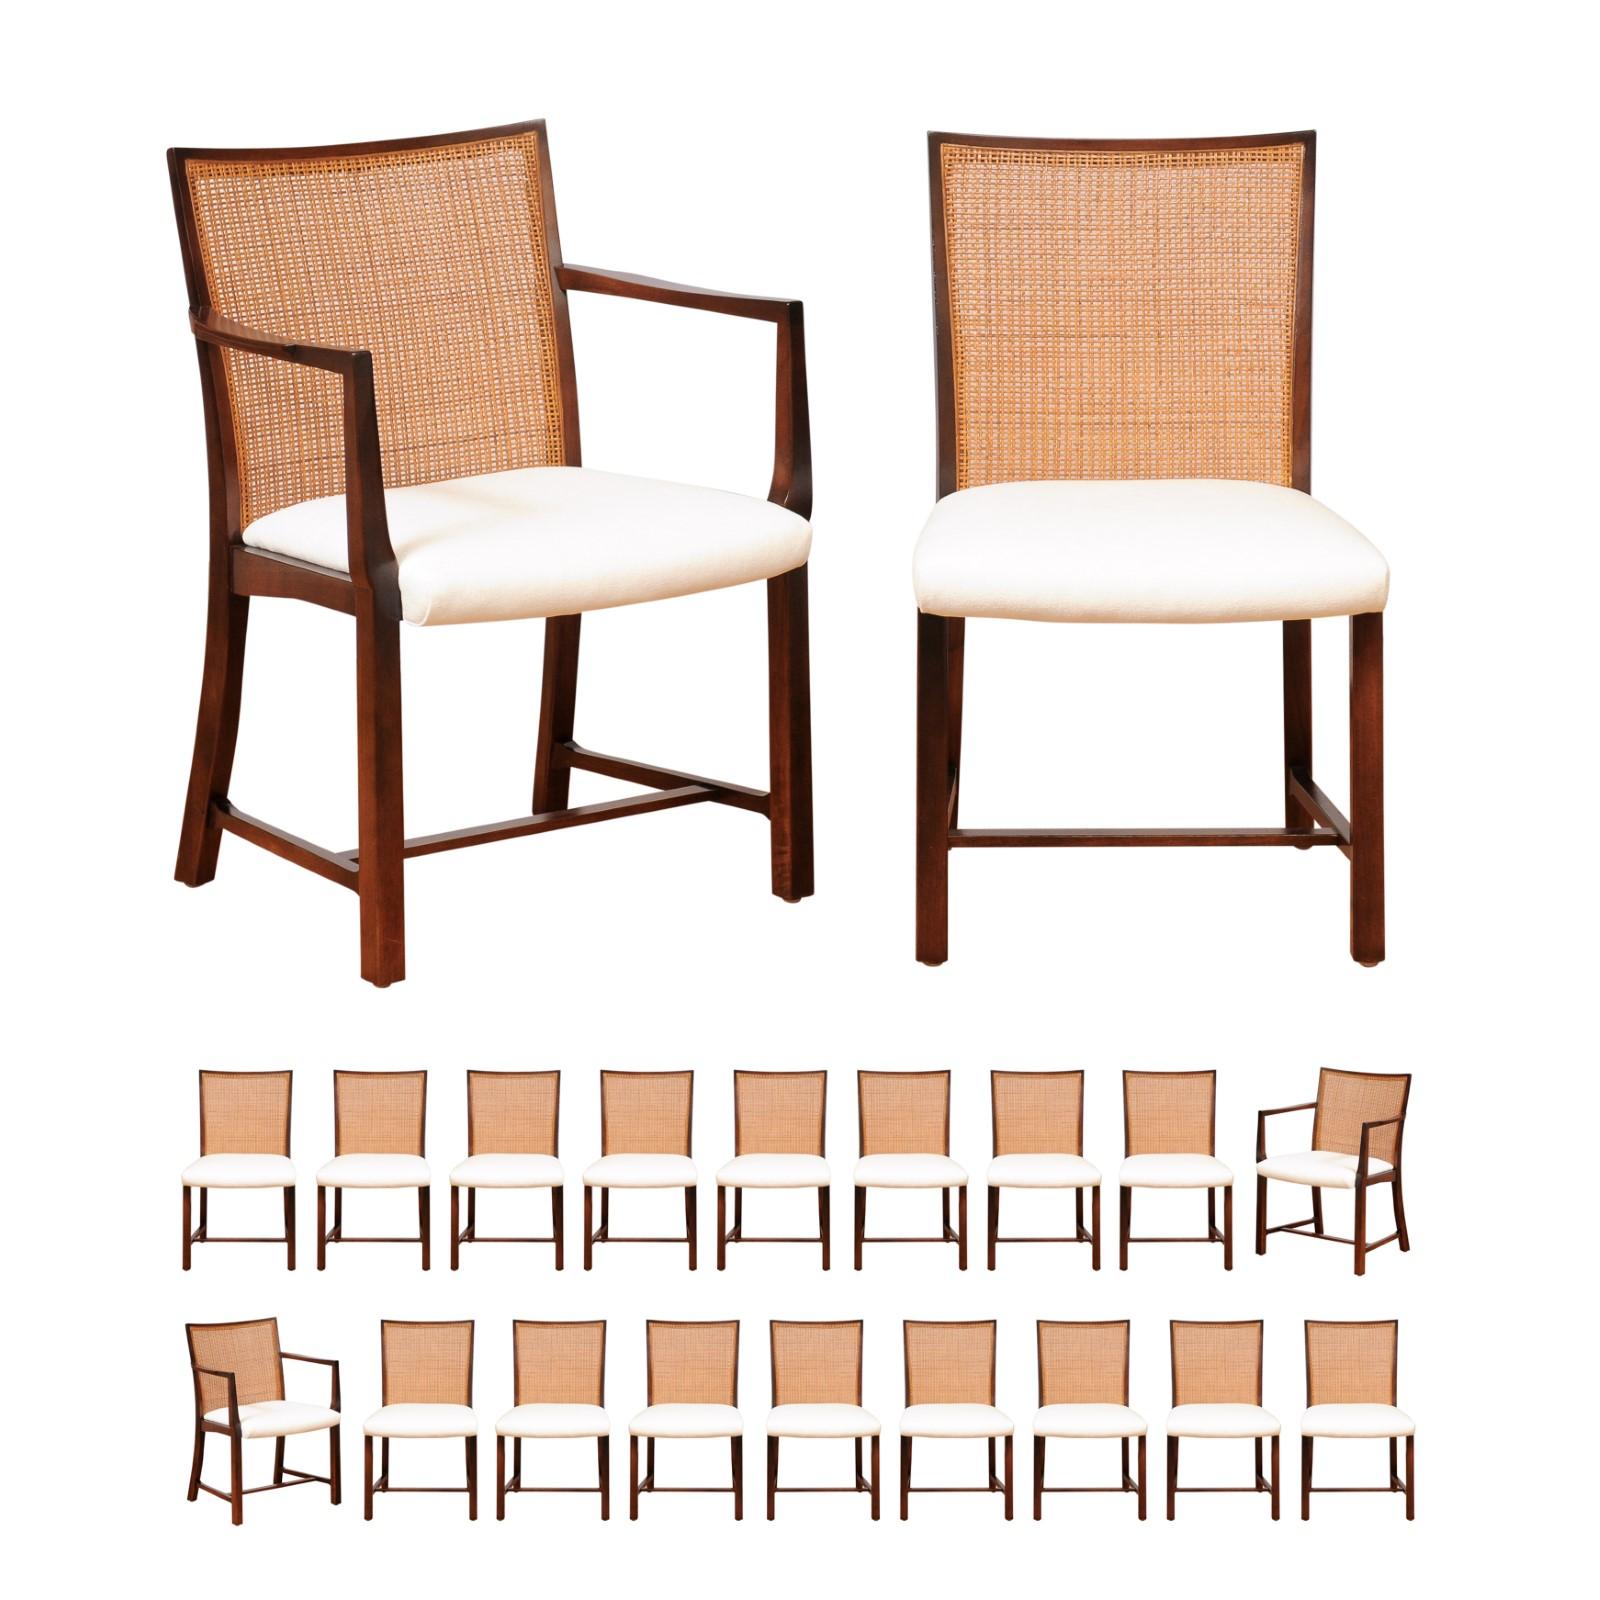 This magnificent large restored set of impossible to find seating examples is unique on the World market. These beautiful dining chairs are shipped as professionally photographed and described in the listing narrative: meticulously professionally